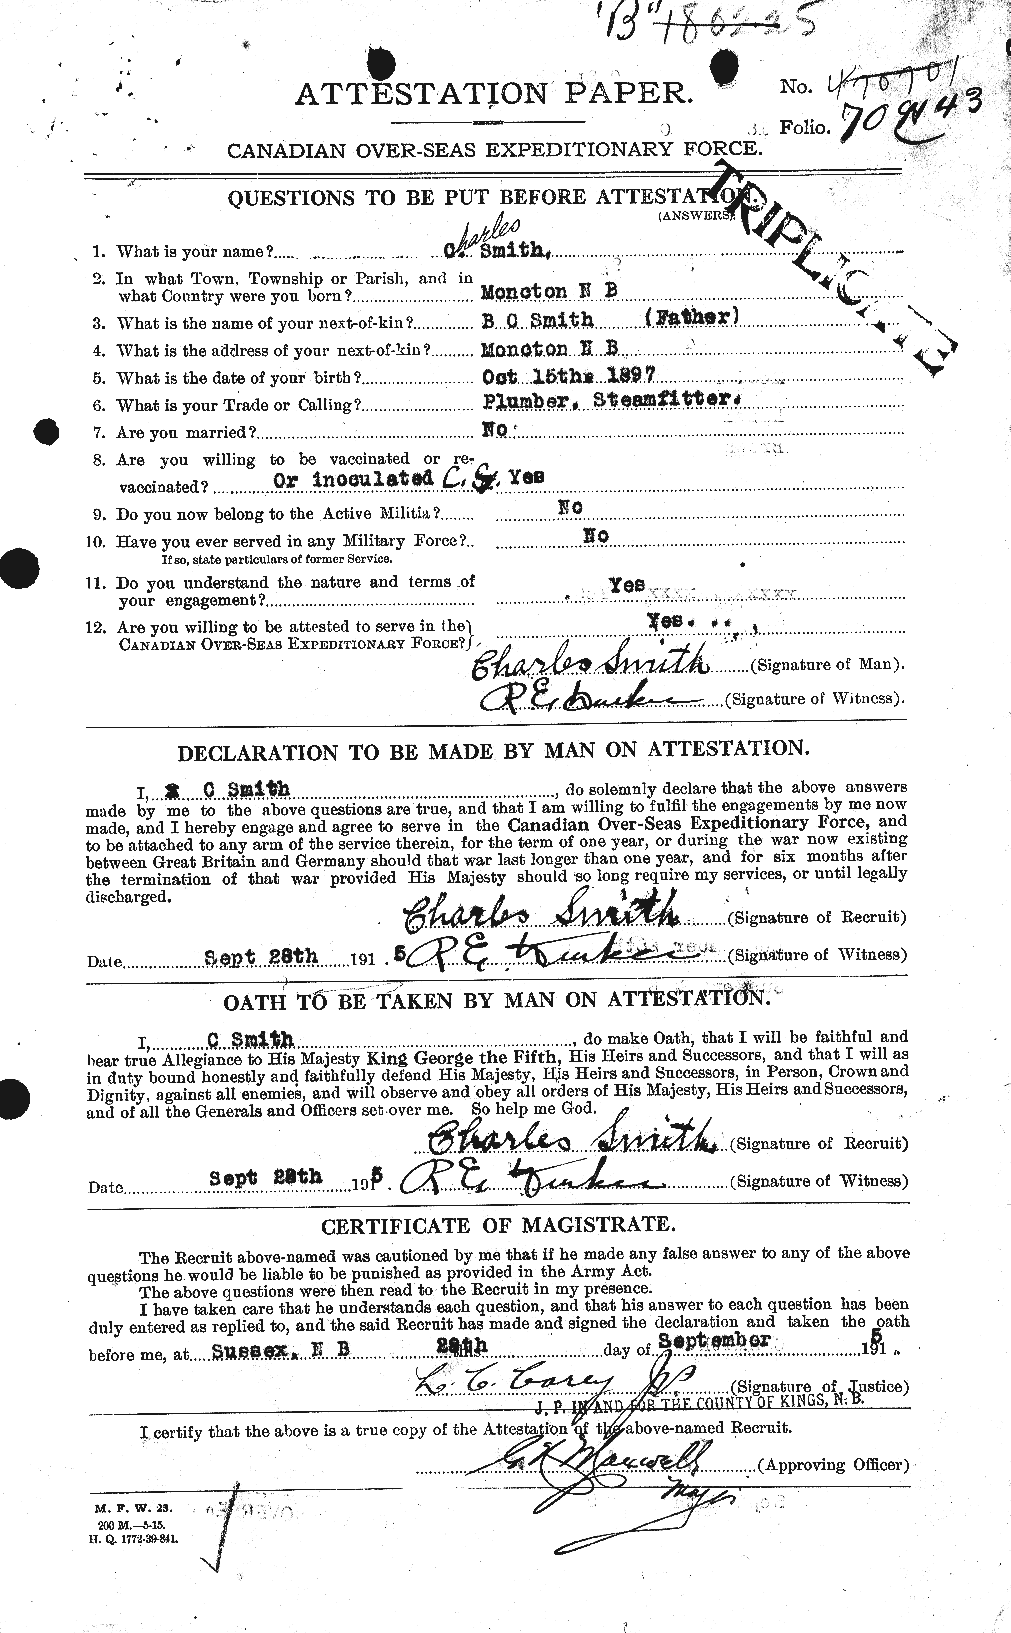 Personnel Records of the First World War - CEF 100316a